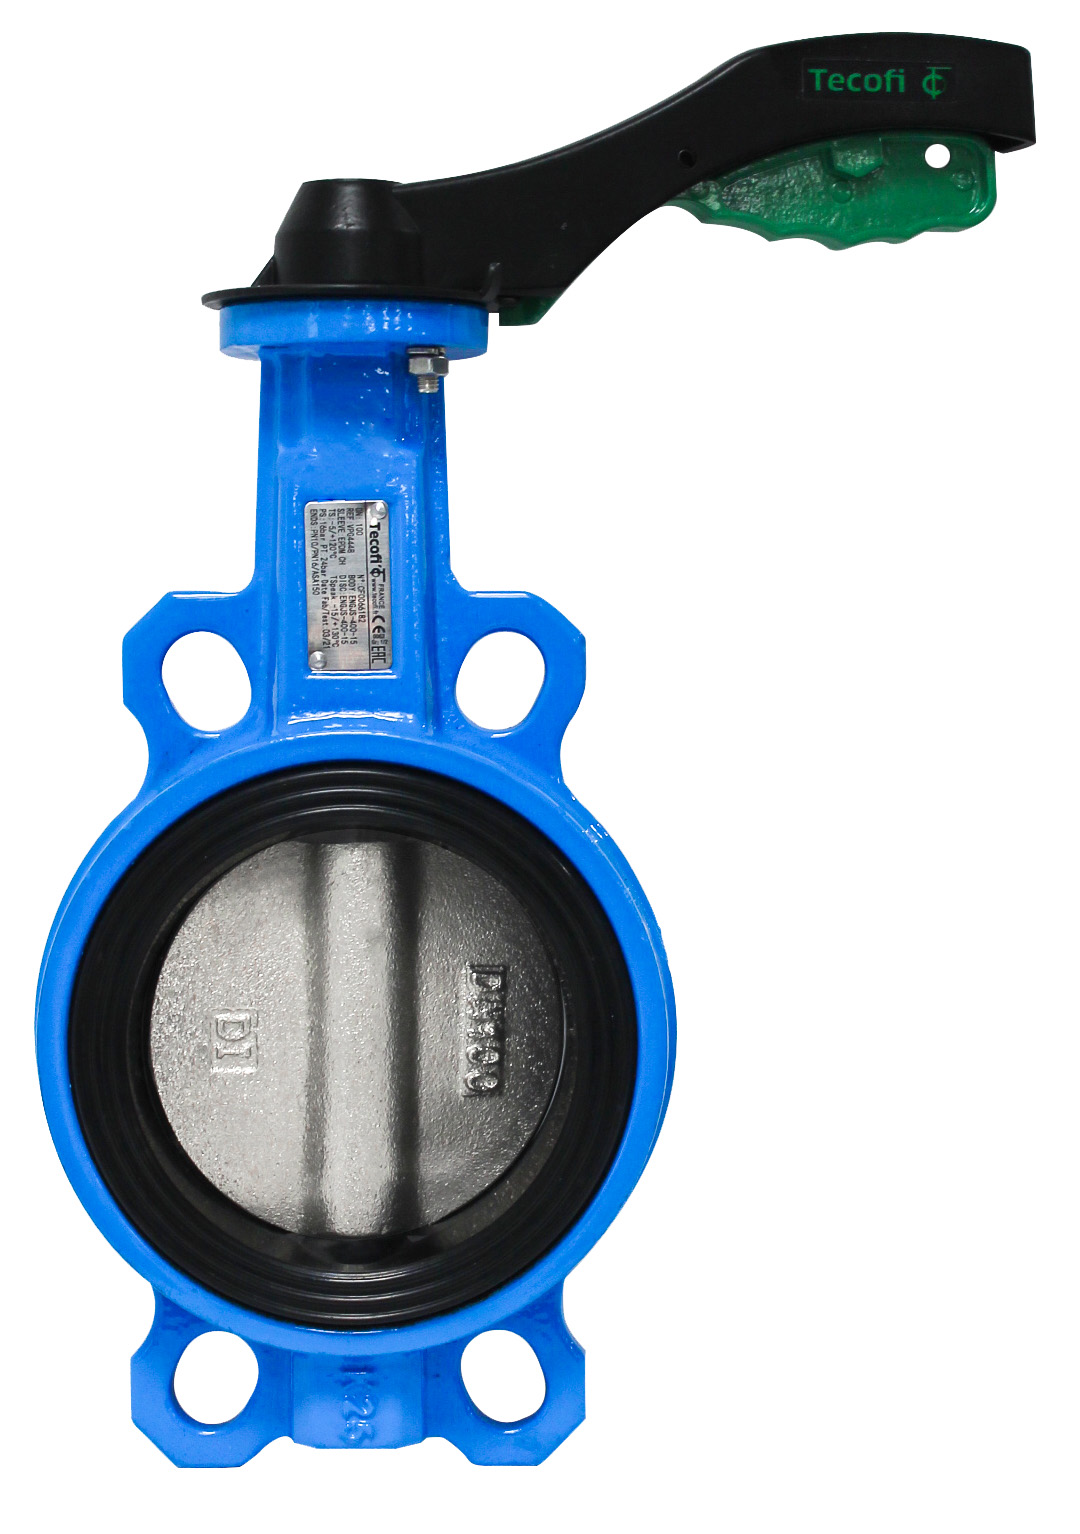 Butterfly valve wafer PN16 – ductile iron body and stainless steel disc – EPDM